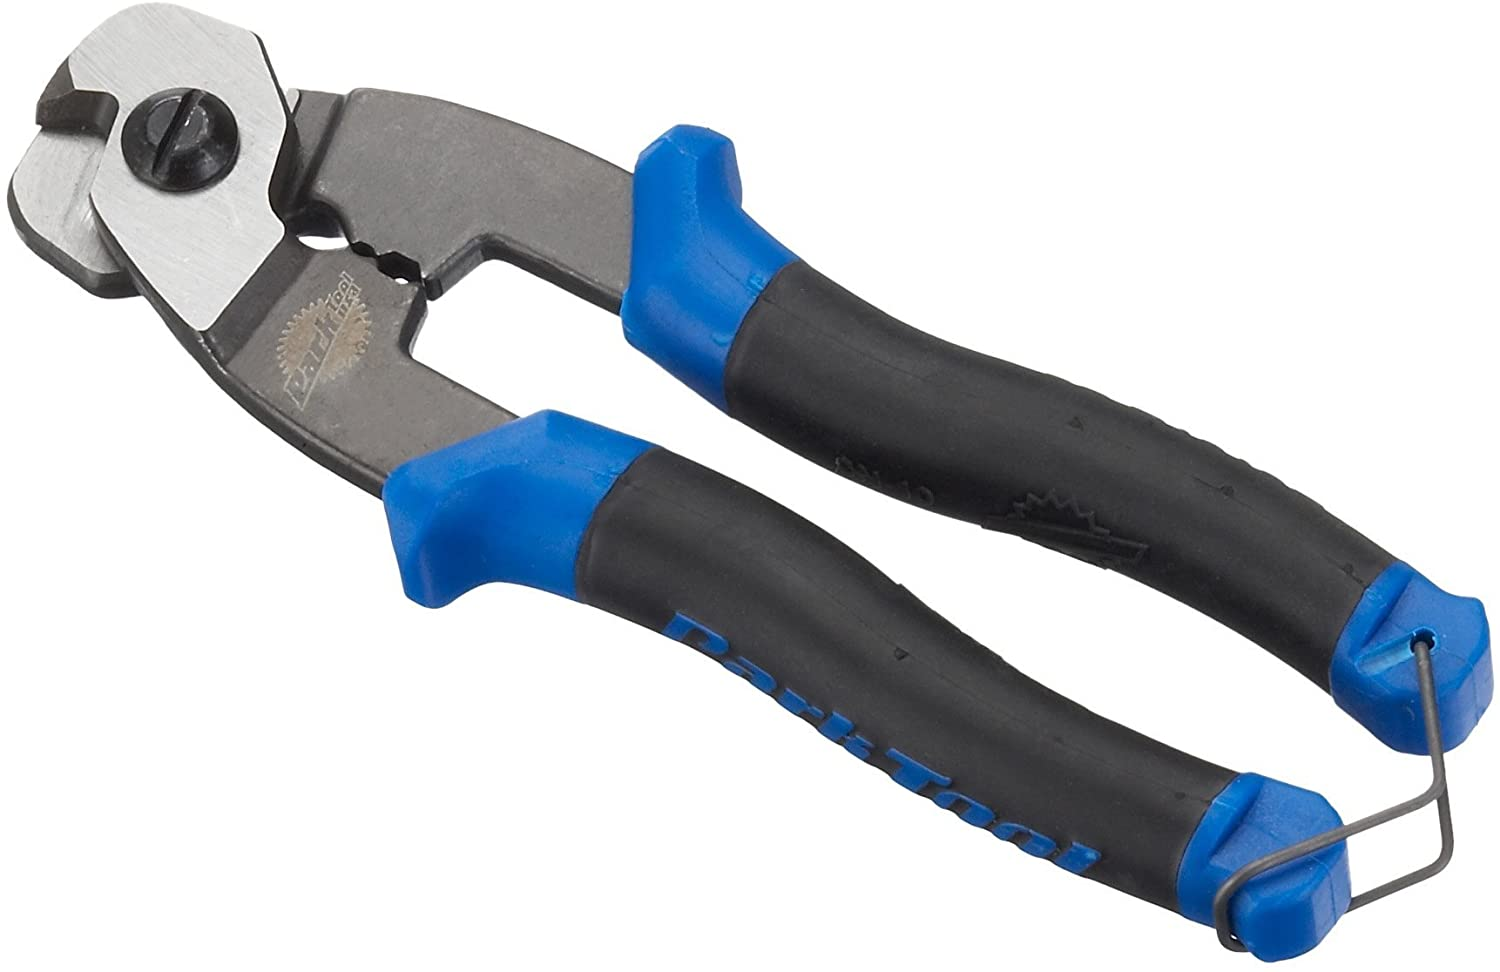 Wire cutters like these are handy for cutting cables and crimping.